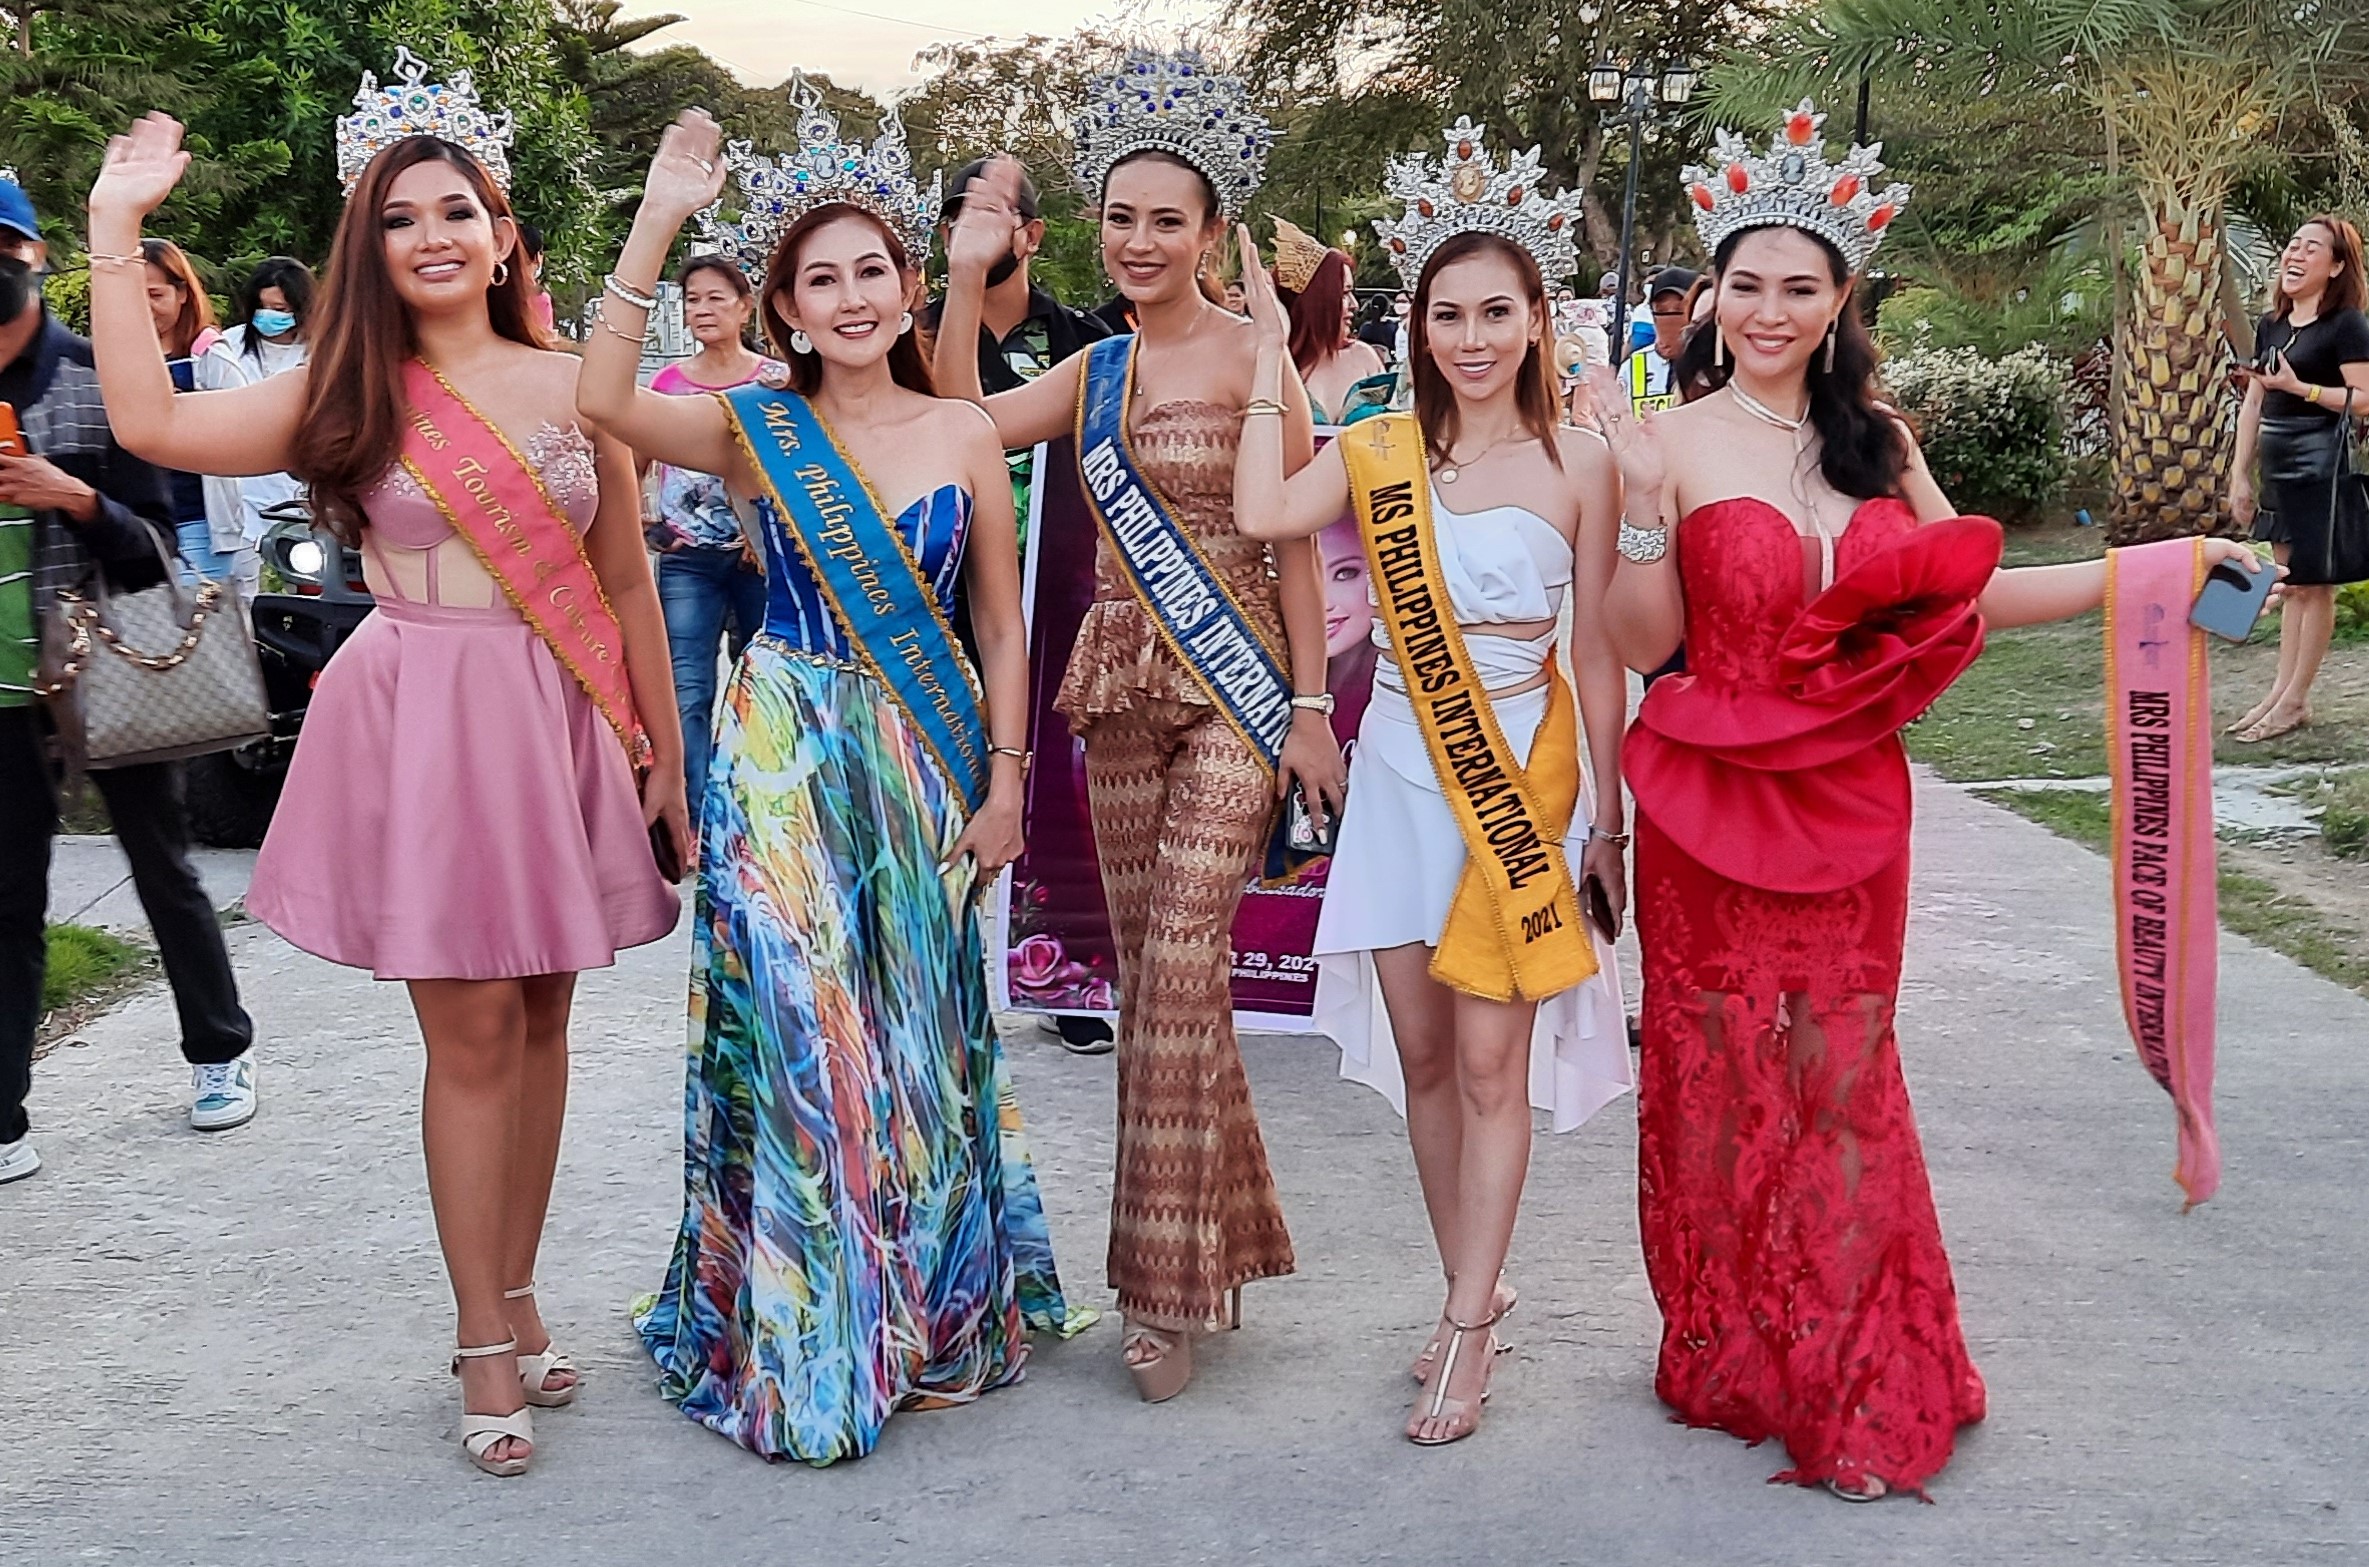 Reigning Mrs. Philippines International Leona Luisa Andersen (center) leads her pageant organization’s queens in a parade at Torres Farm and Resort